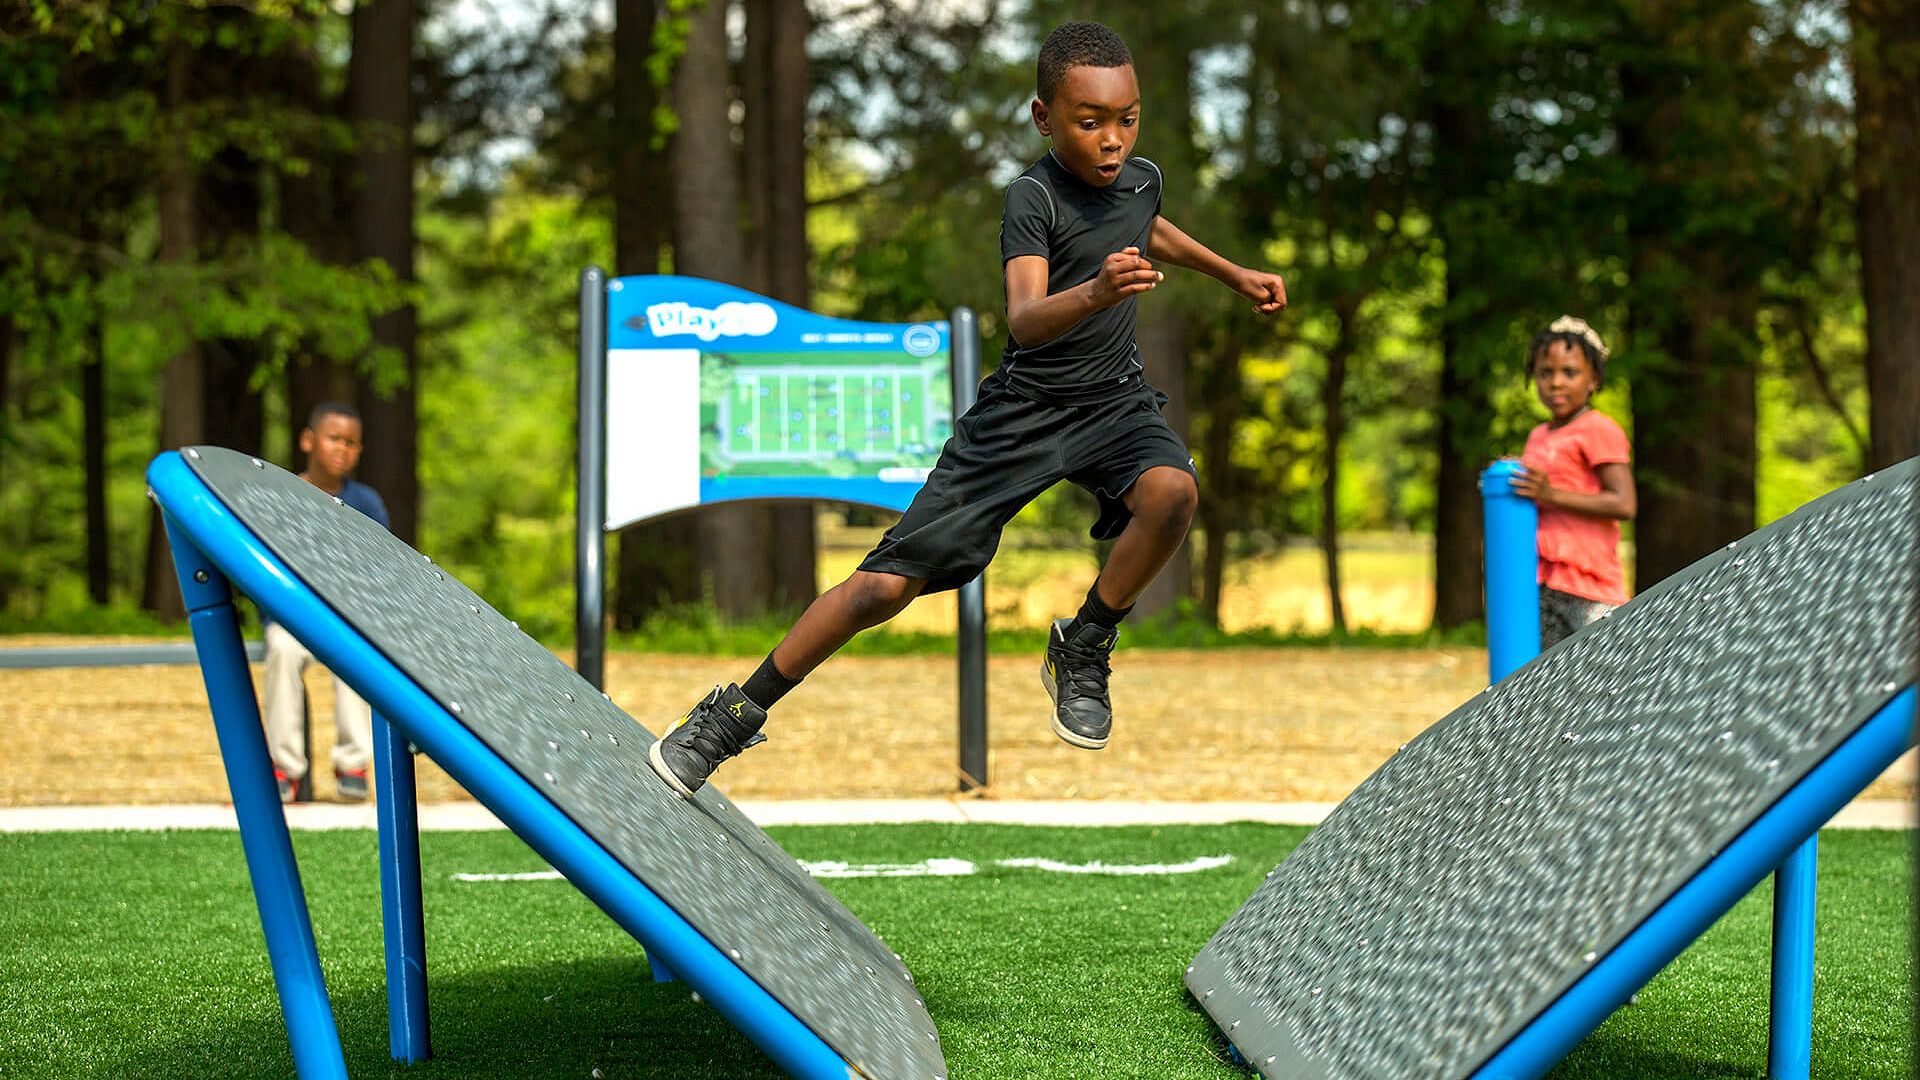 Challenge Course by GameTime™ Brings the Obstacle Course Experience to